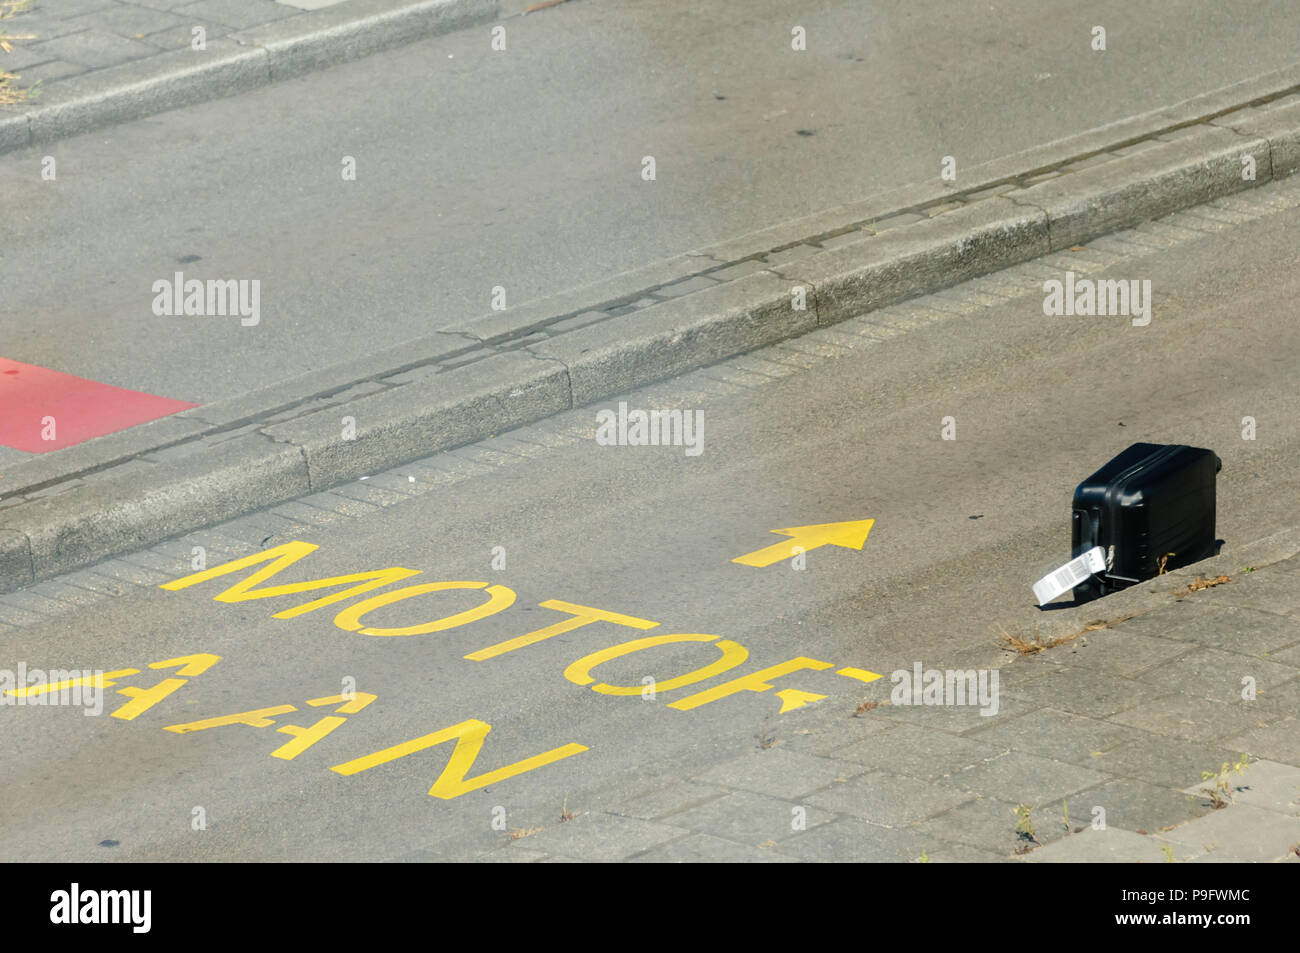 Passenger luggage suitcase lies on an airport road after falling off a baggage truck, will be lost luggage. Stock Photo